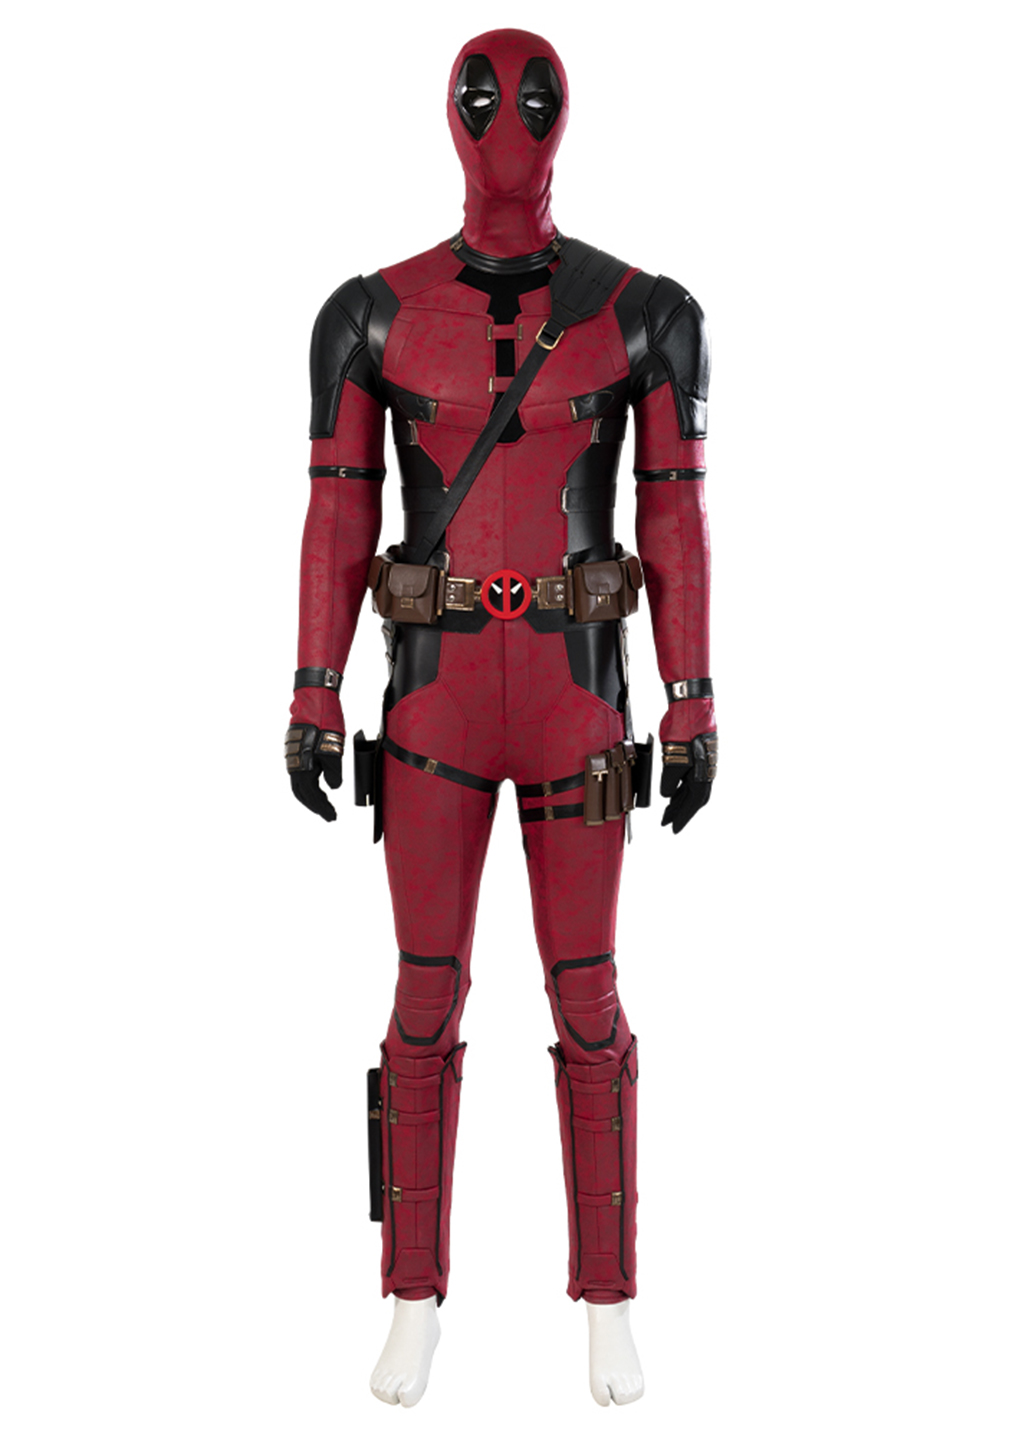 Wade Wilson Costume Cosplay Deadpool 3 Ver.2 Suit Outfit